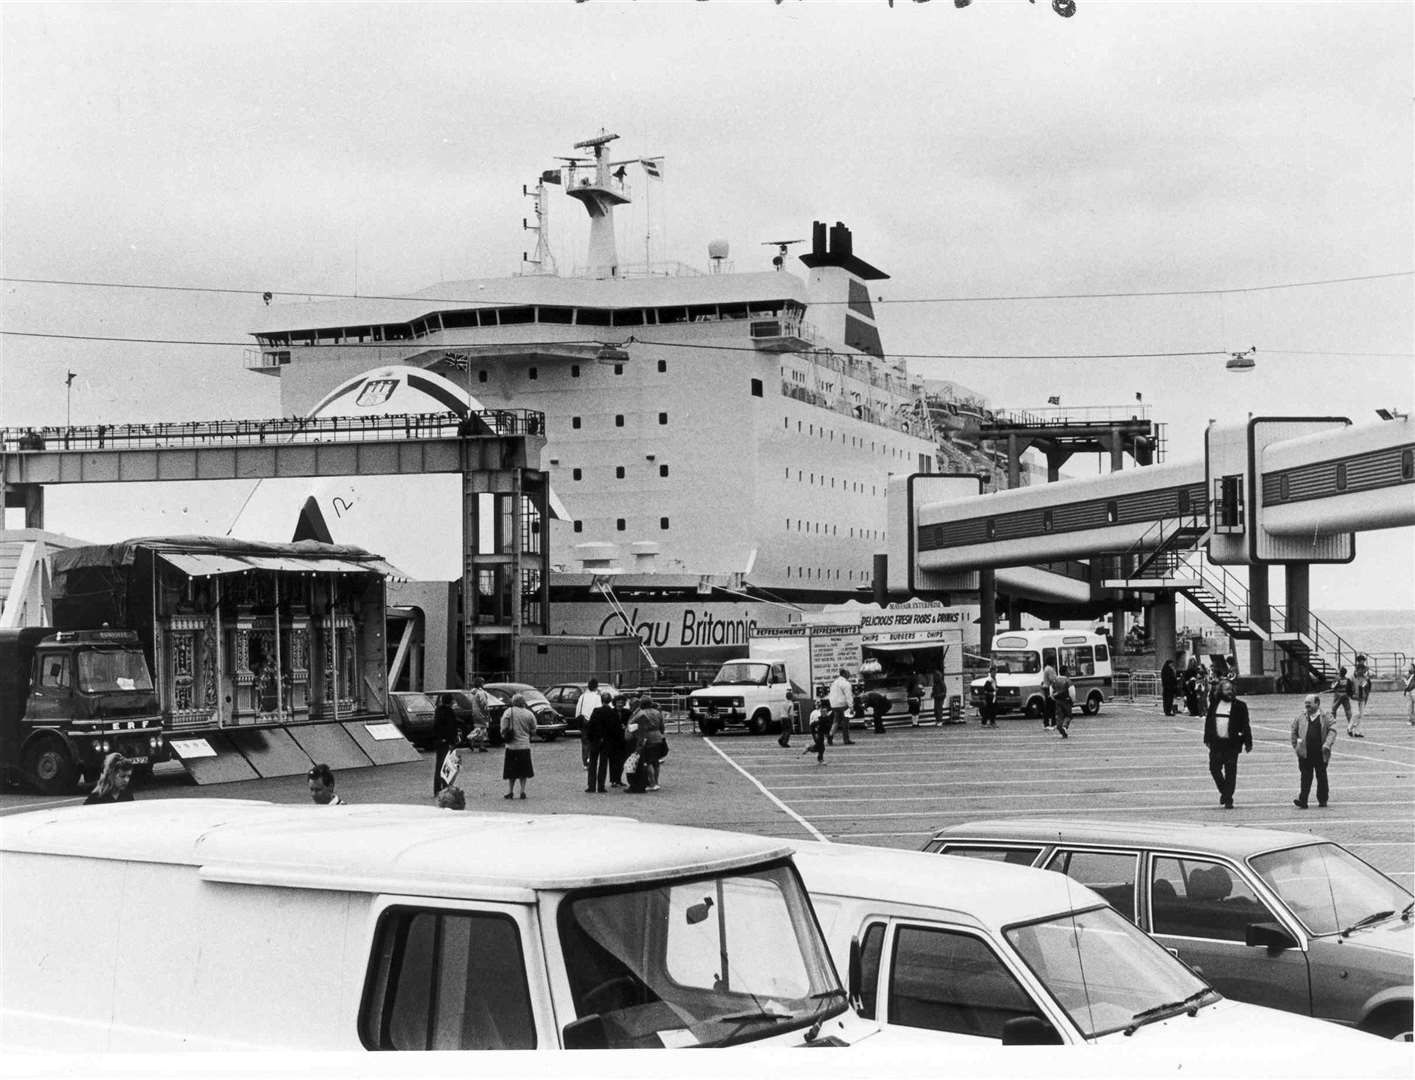 The Olau Britannia docked at Sheerness Docks in October 1990